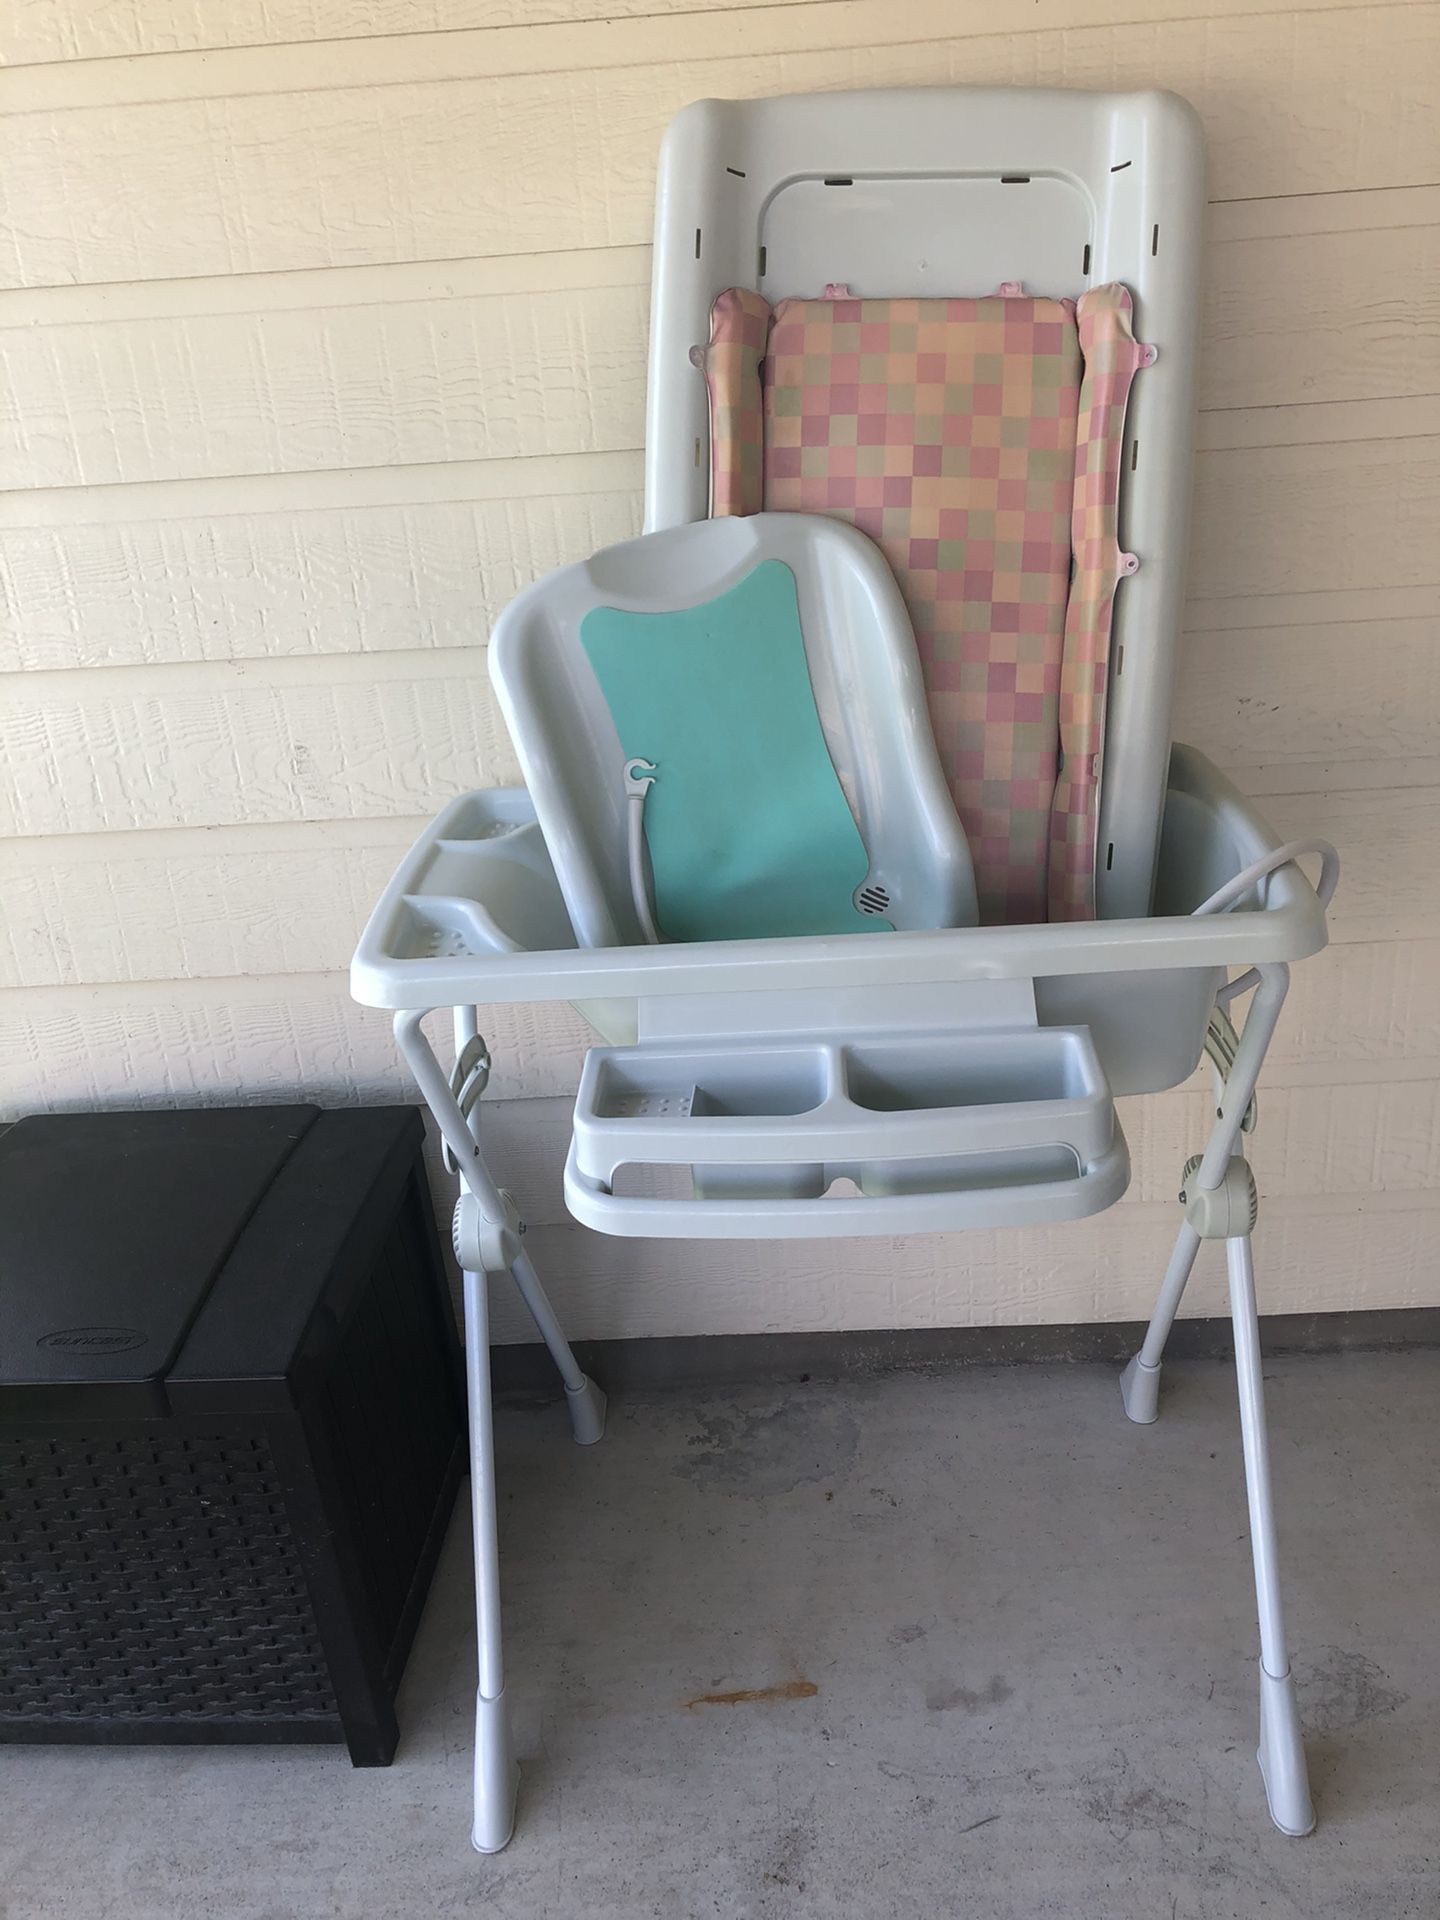 Burigotto Millenia Bathtub AND Changing Table Combo WITH Storage Compartment!! $140 Value for $40!!